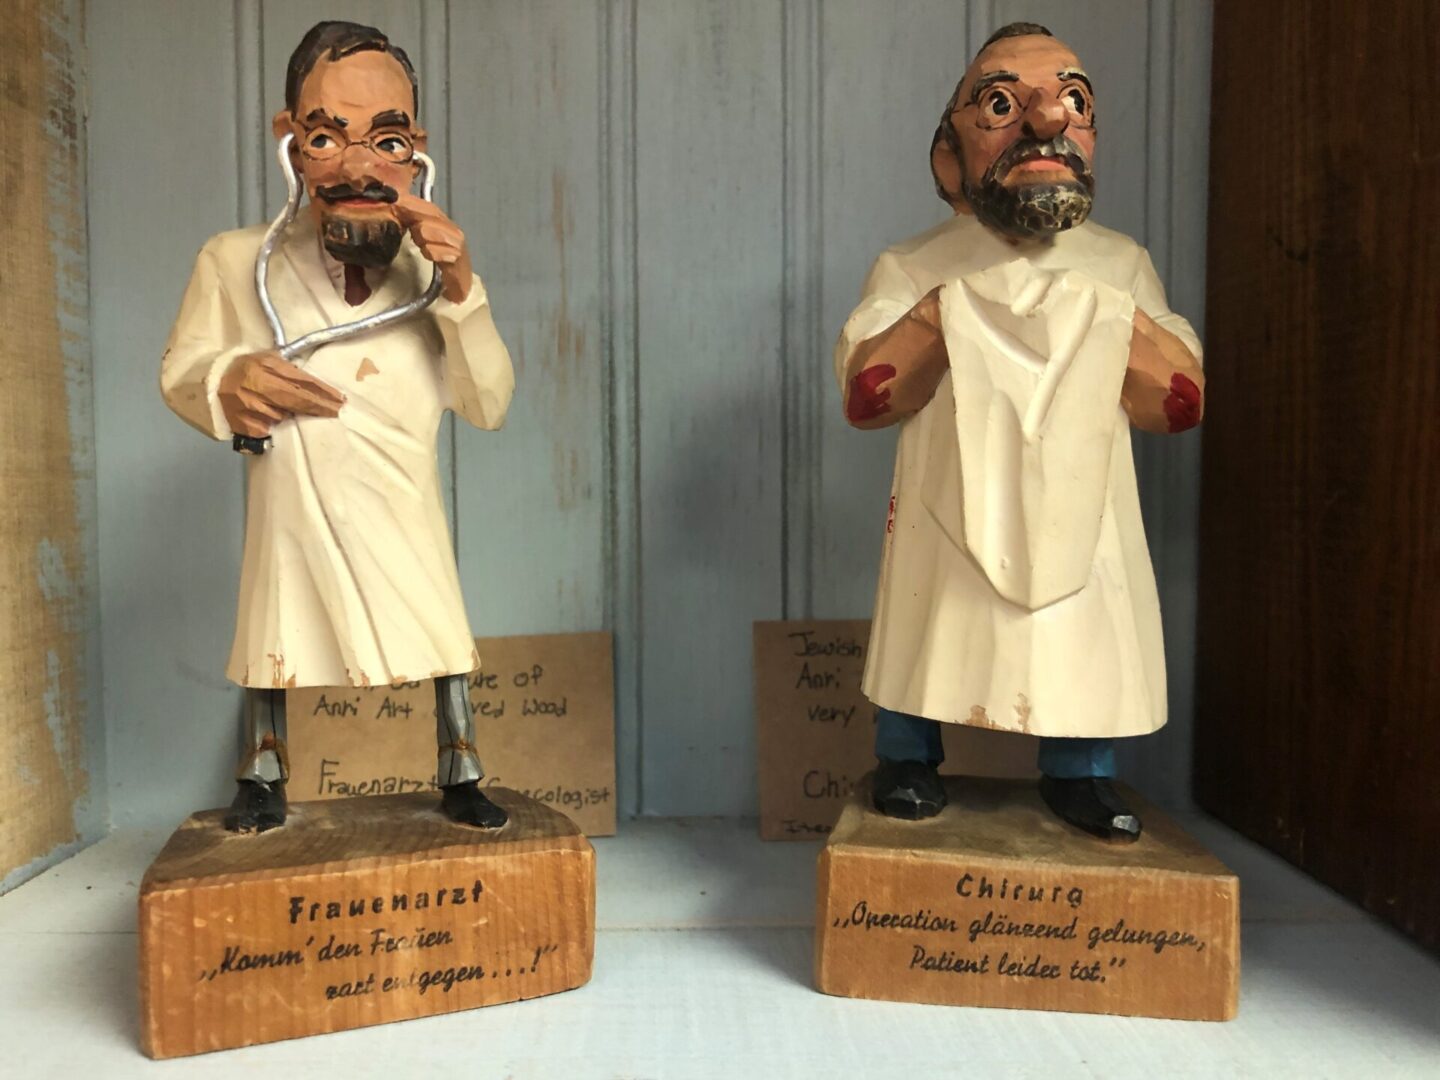 Two figurines of a man in white robes and glasses.